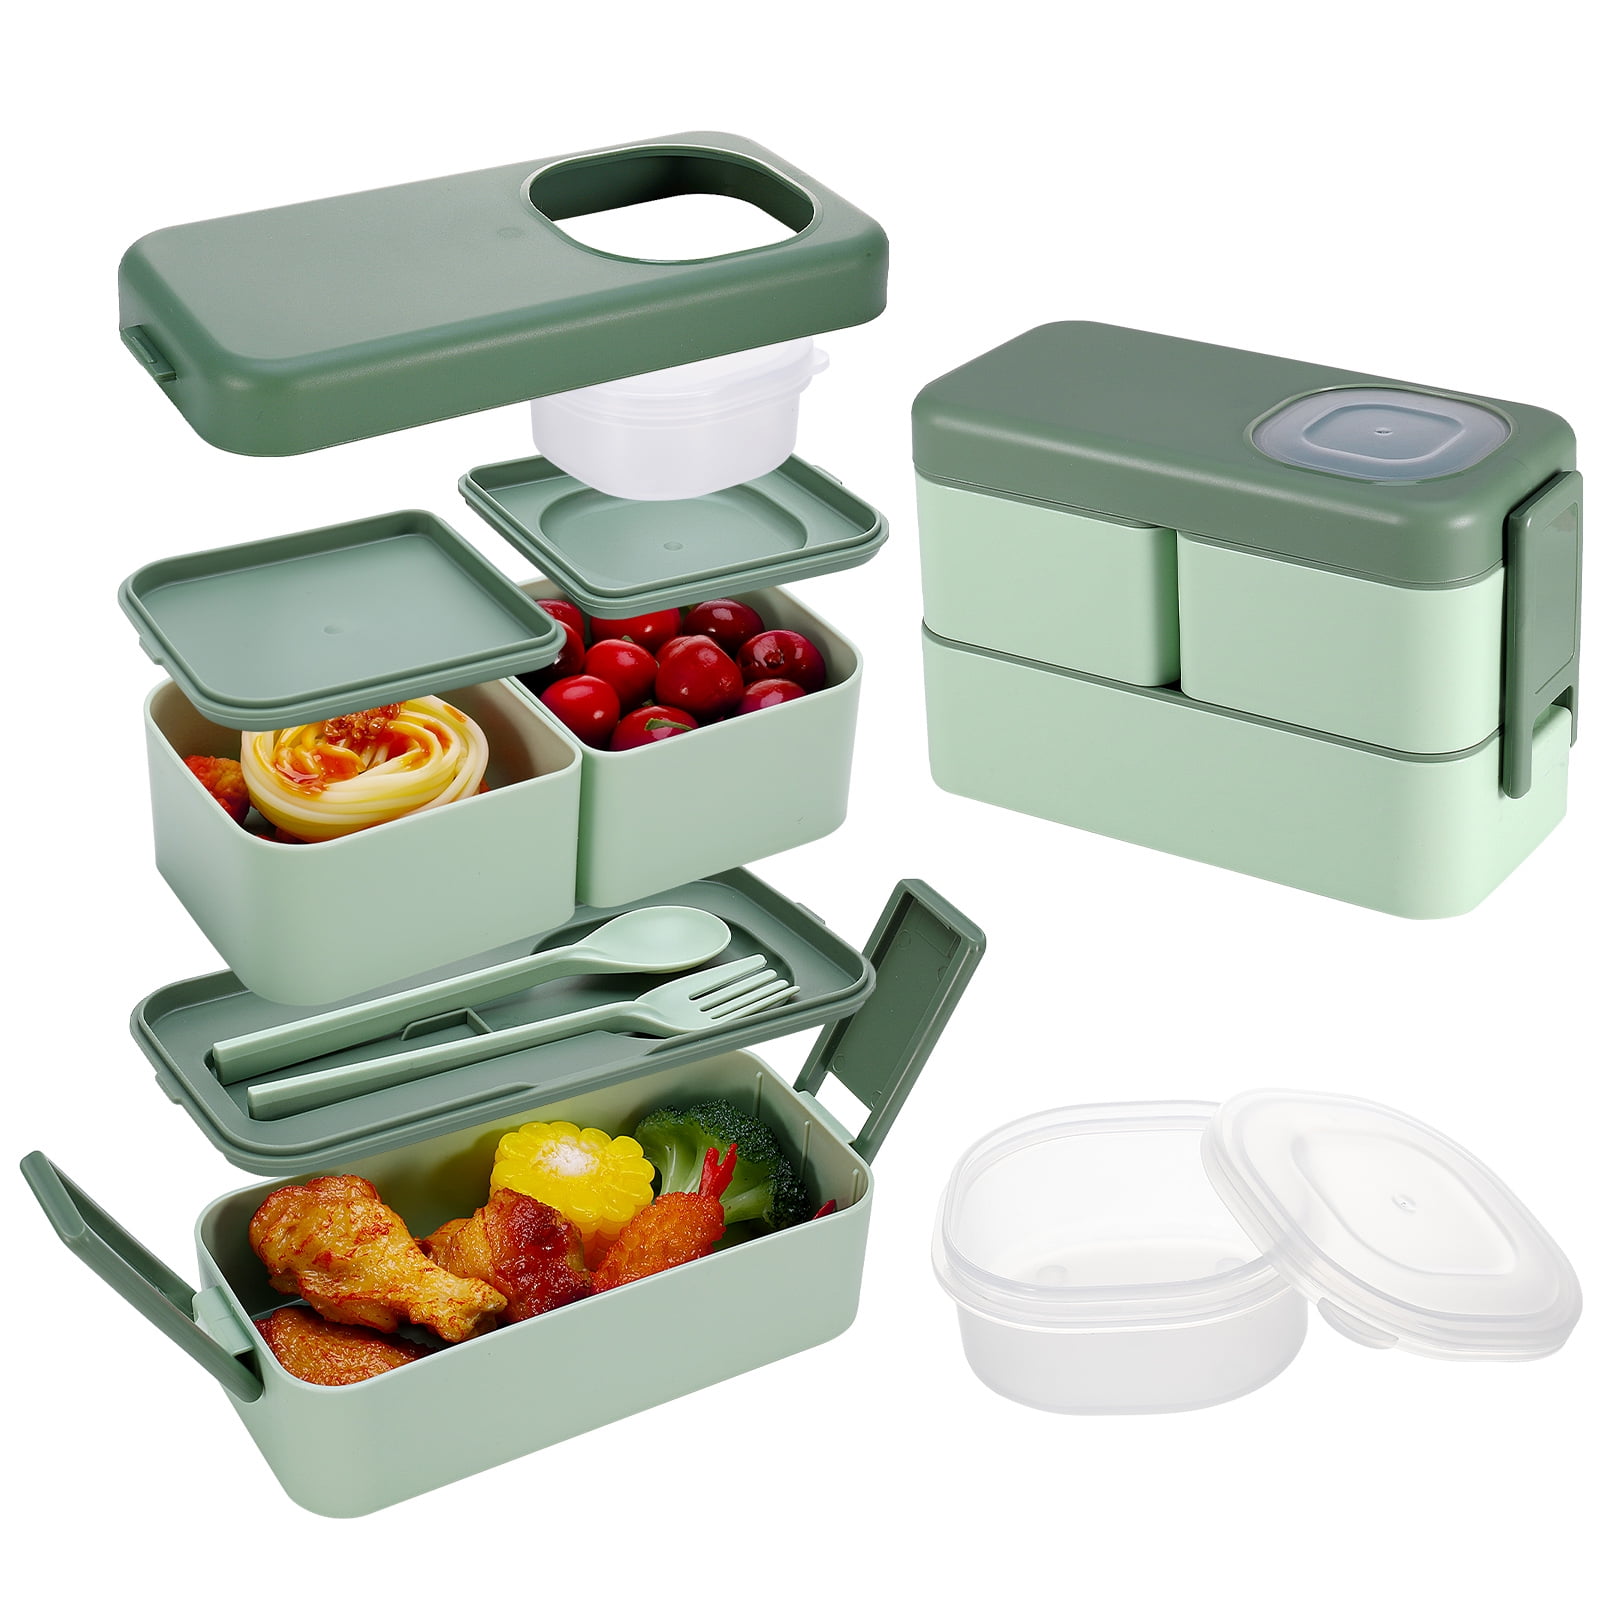 Bentgo®️ Modern Lunch Box - The Stylish and Leak-Proof Lunch Box